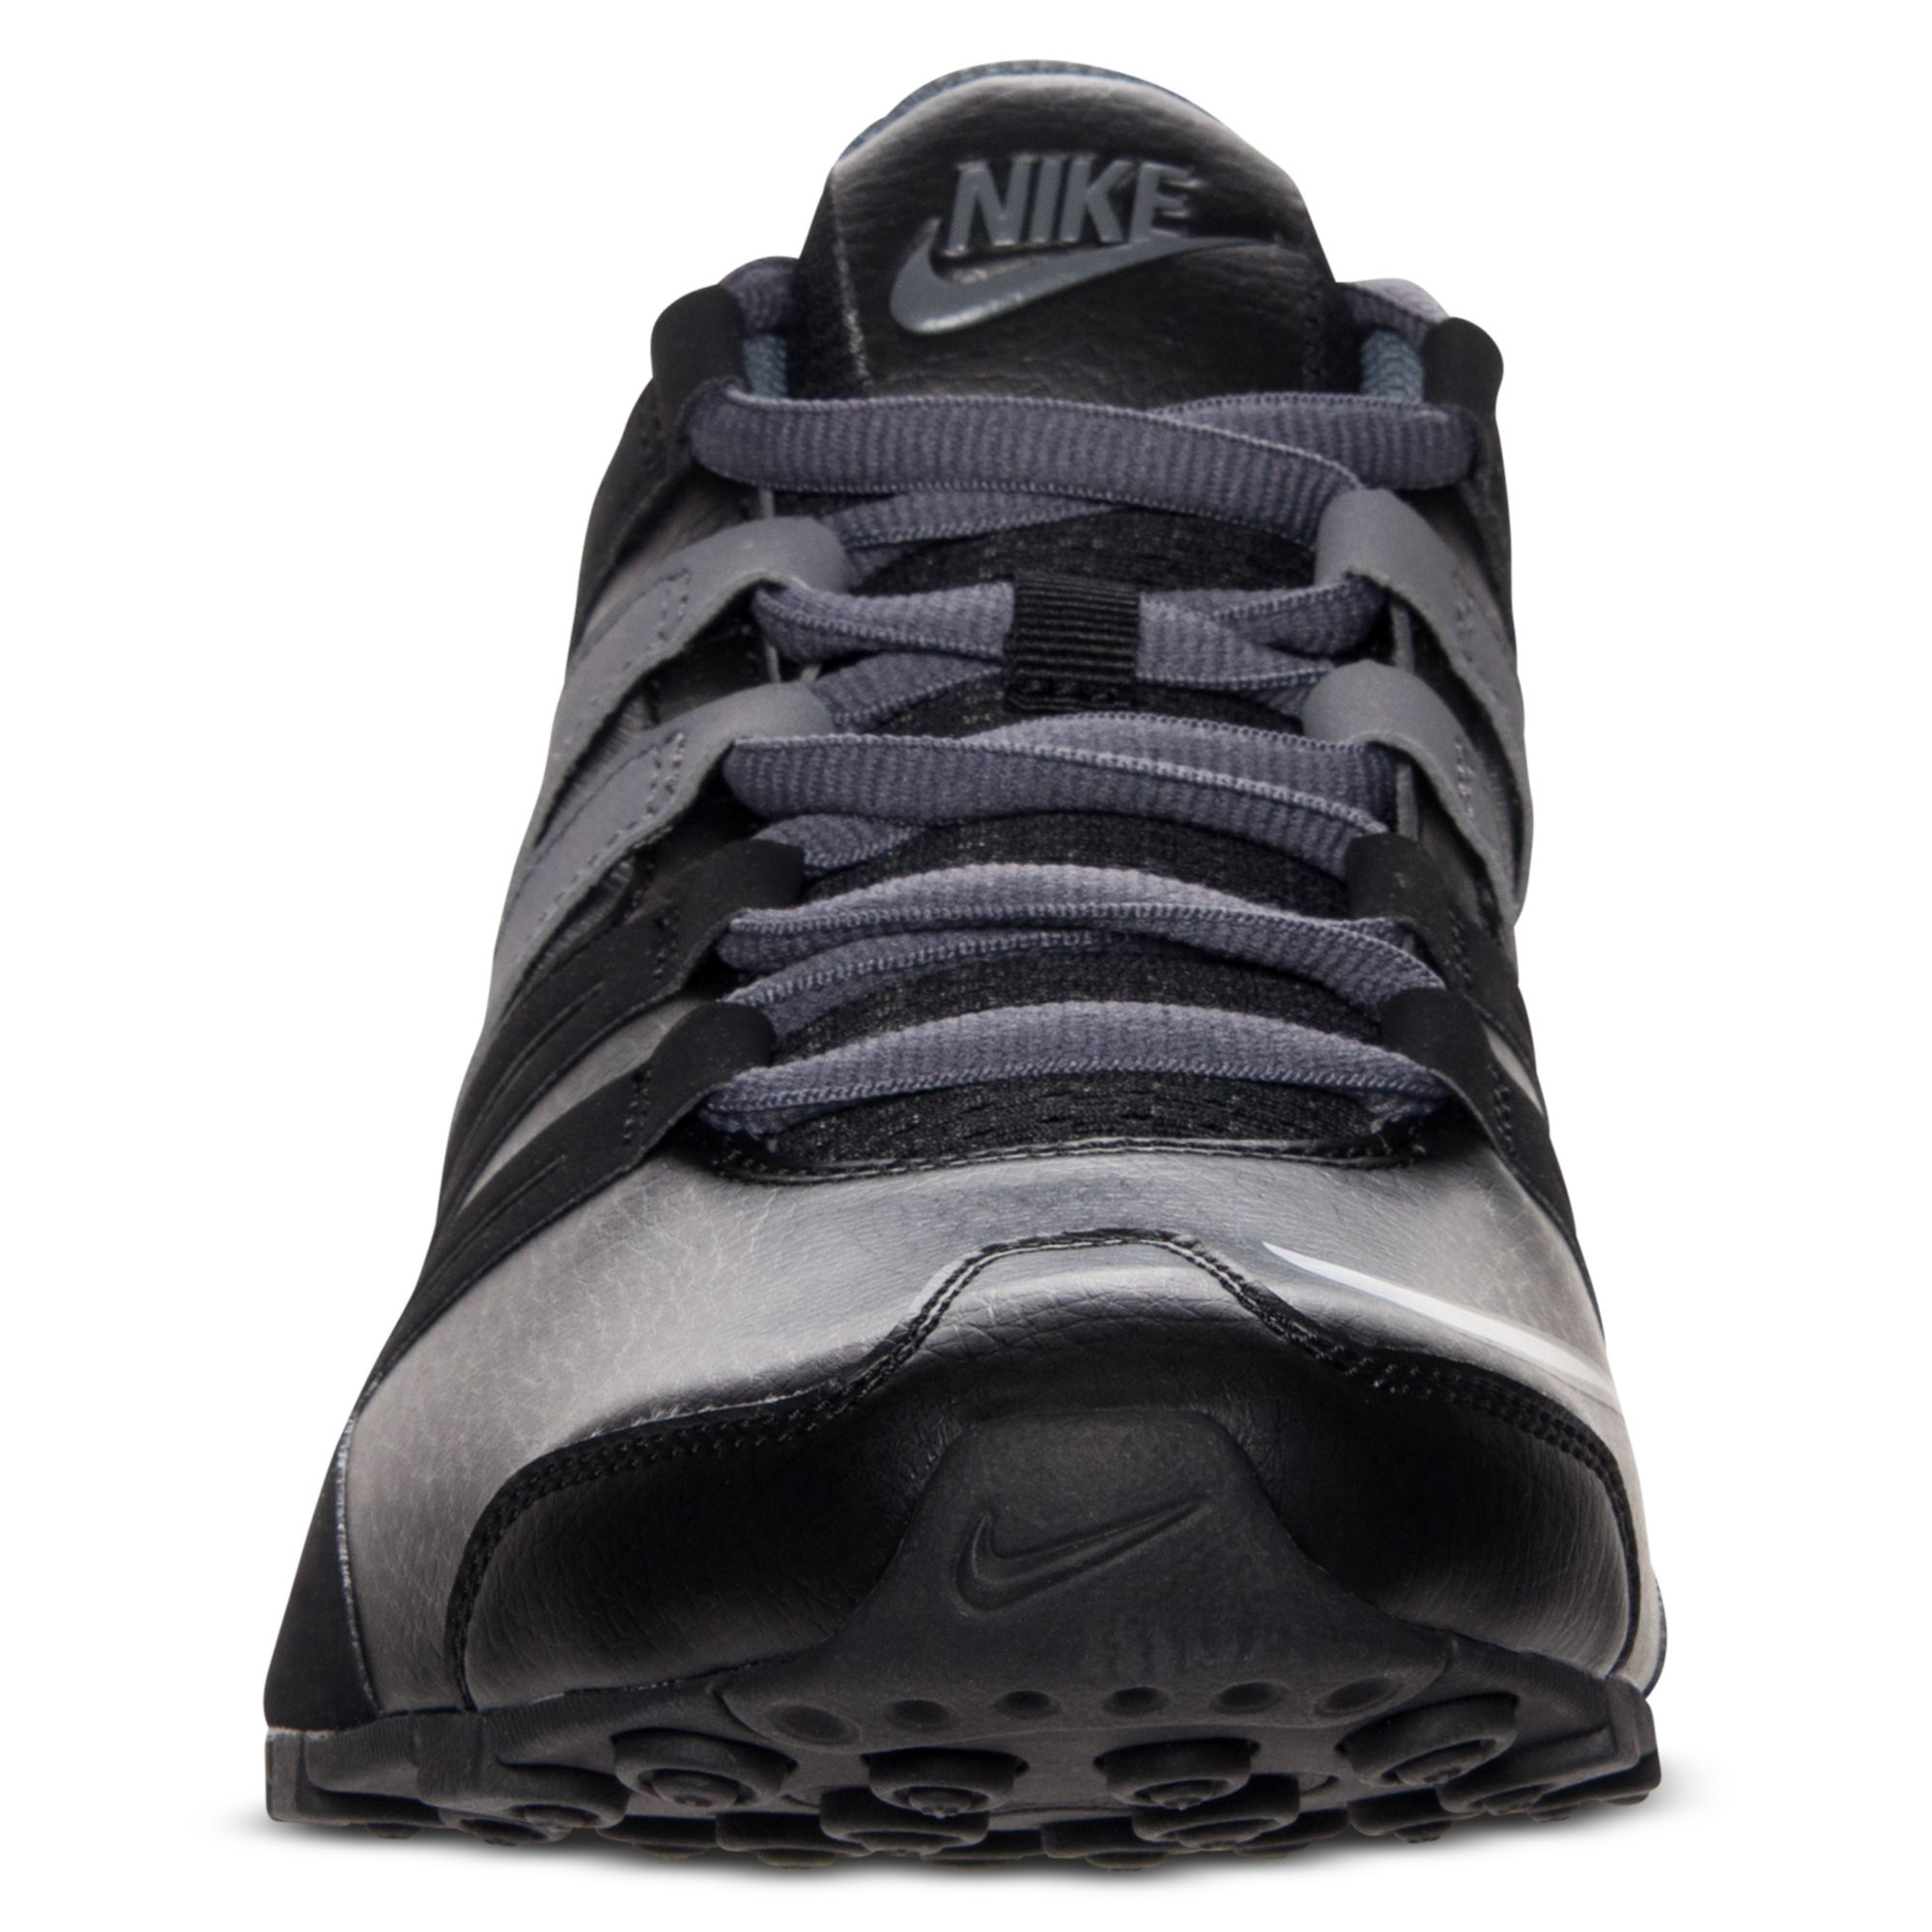 Lyst - Nike Mens Shox Current Running Sneakers From Finish Line in ...